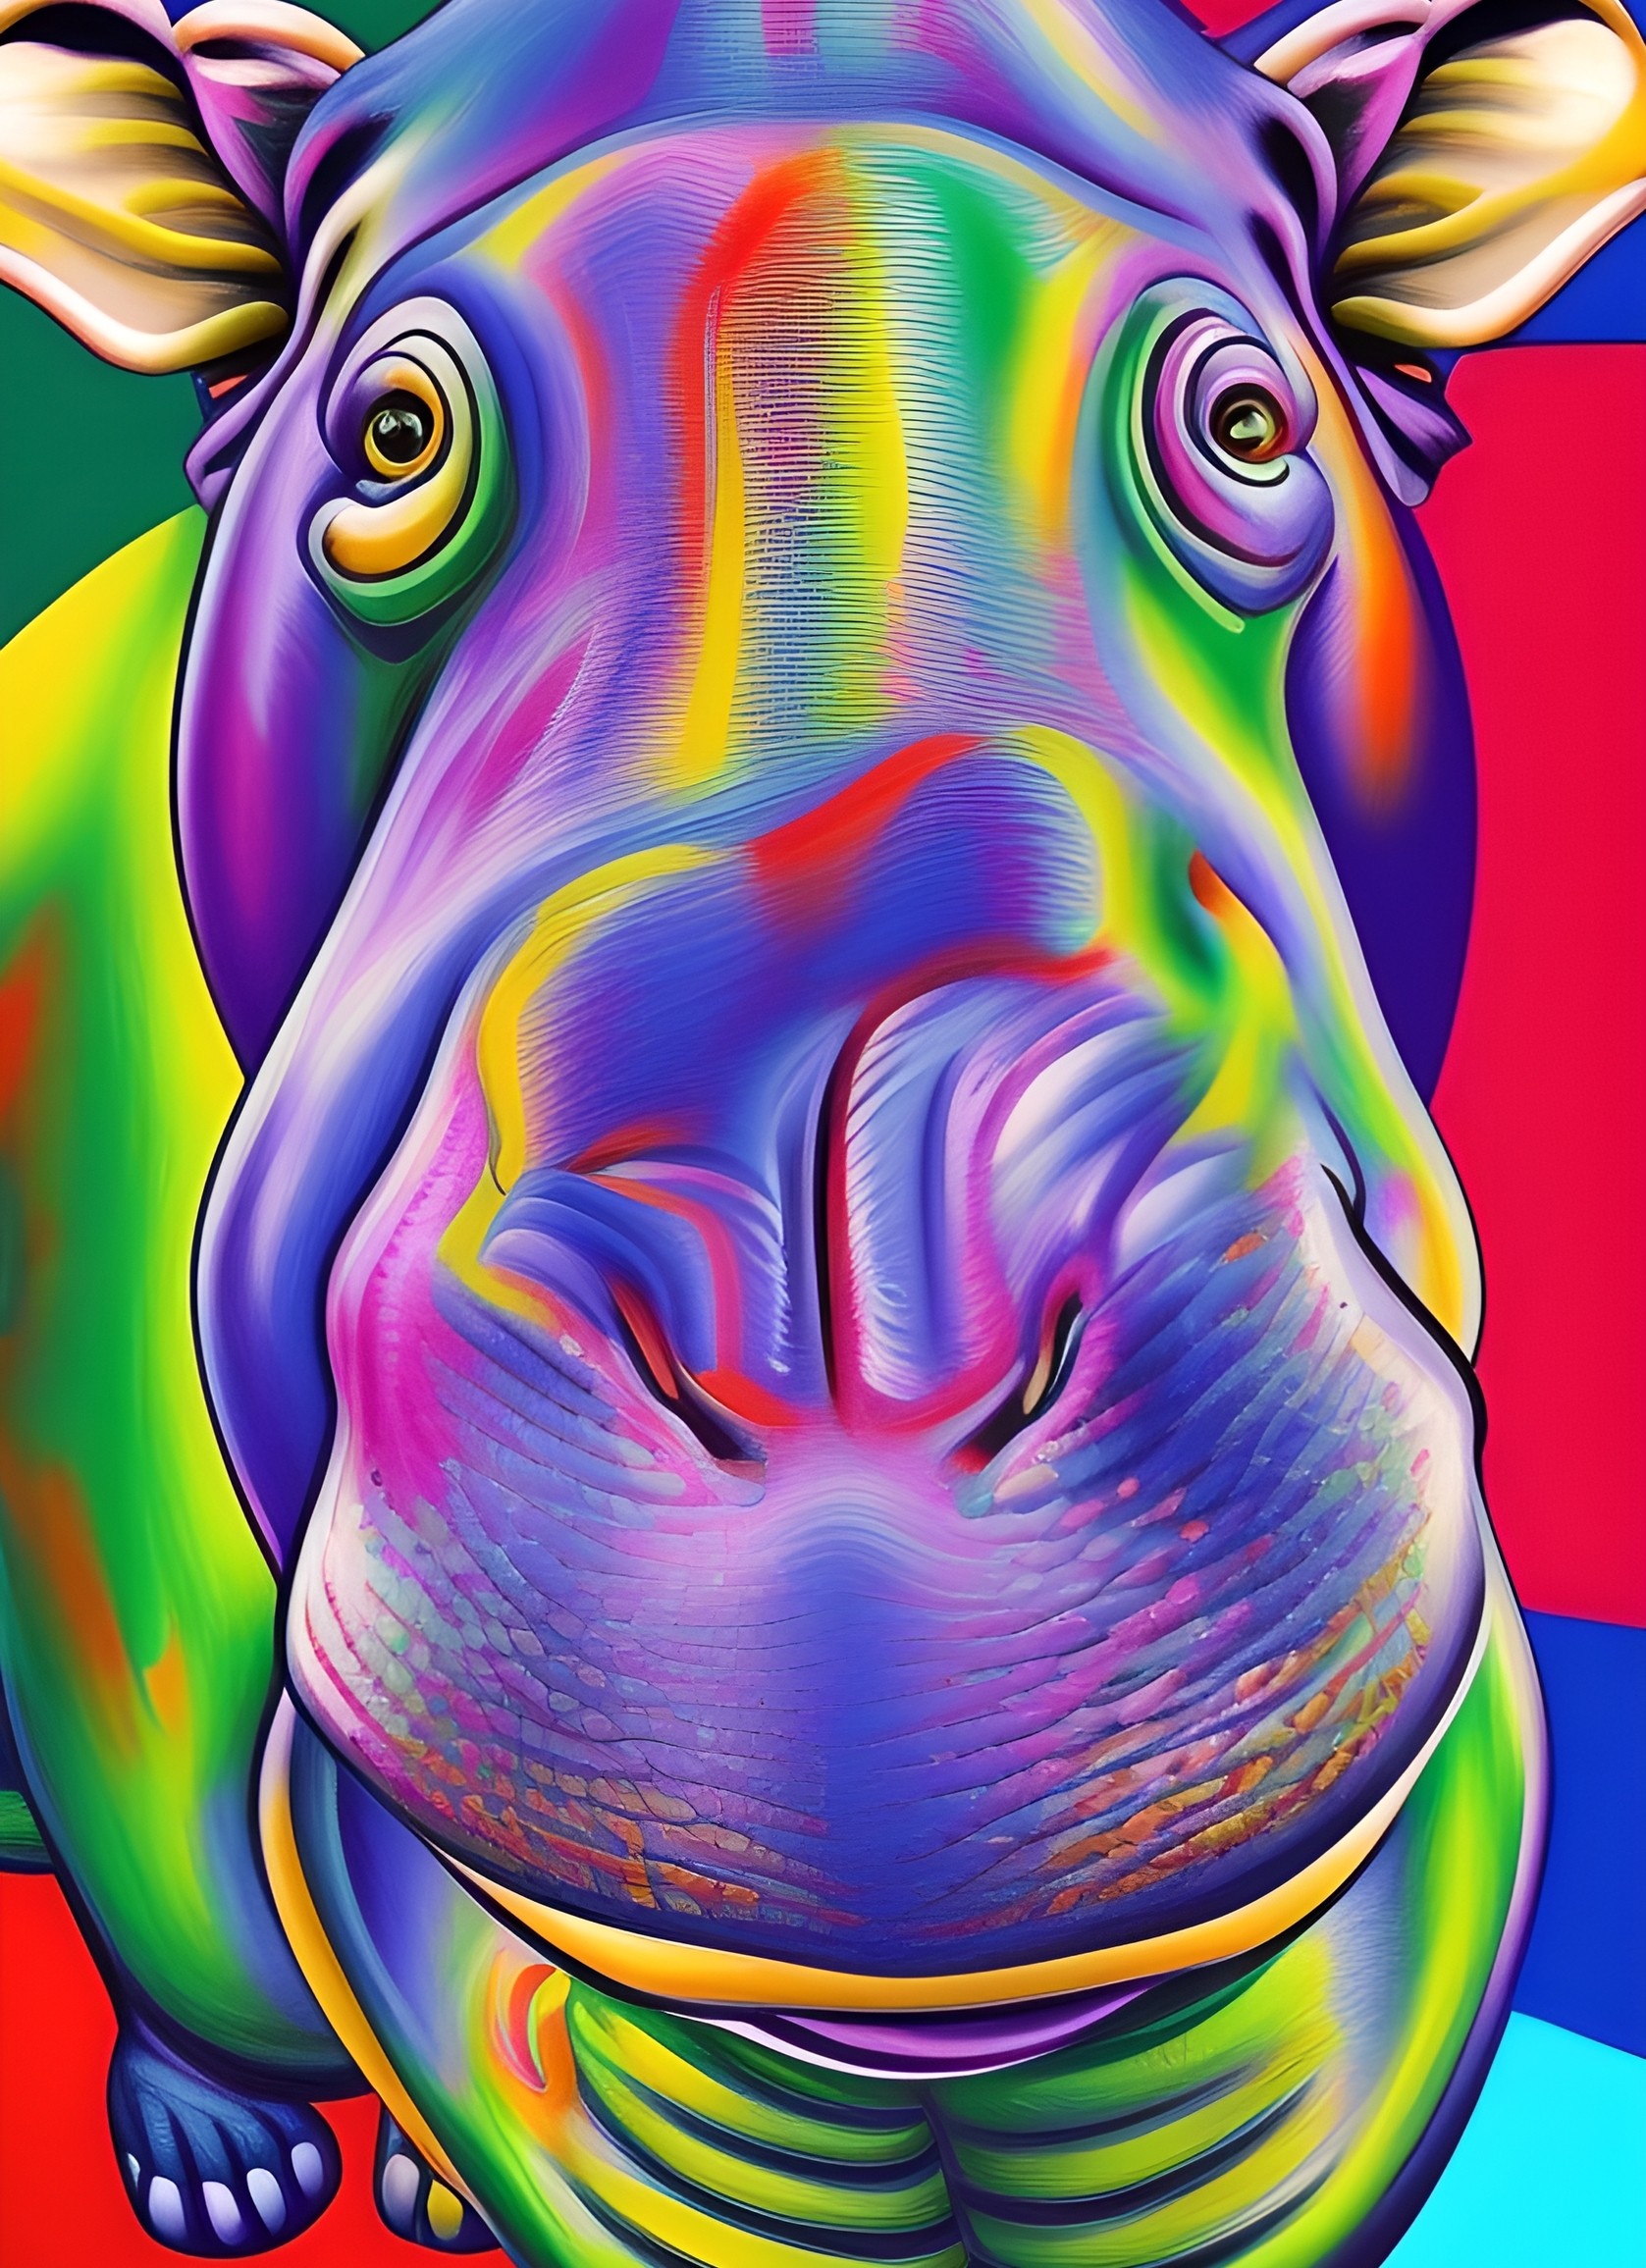 Hippo Animal Colourful Abstract Art Blank Greeting Card